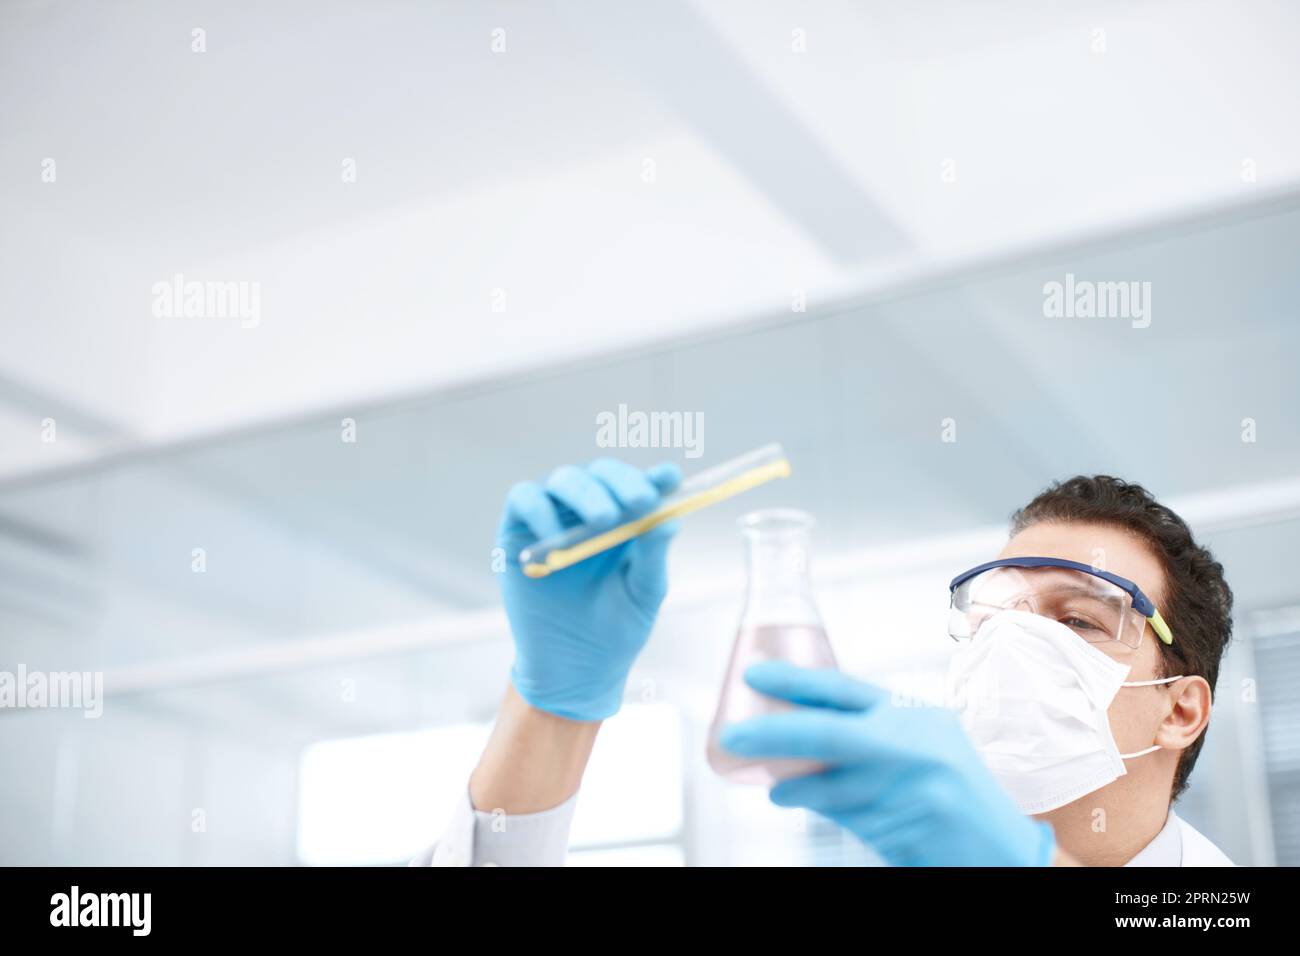 The expert at mixing chemicals. Low angle shot of a chemist mixing chemicals. Stock Photo